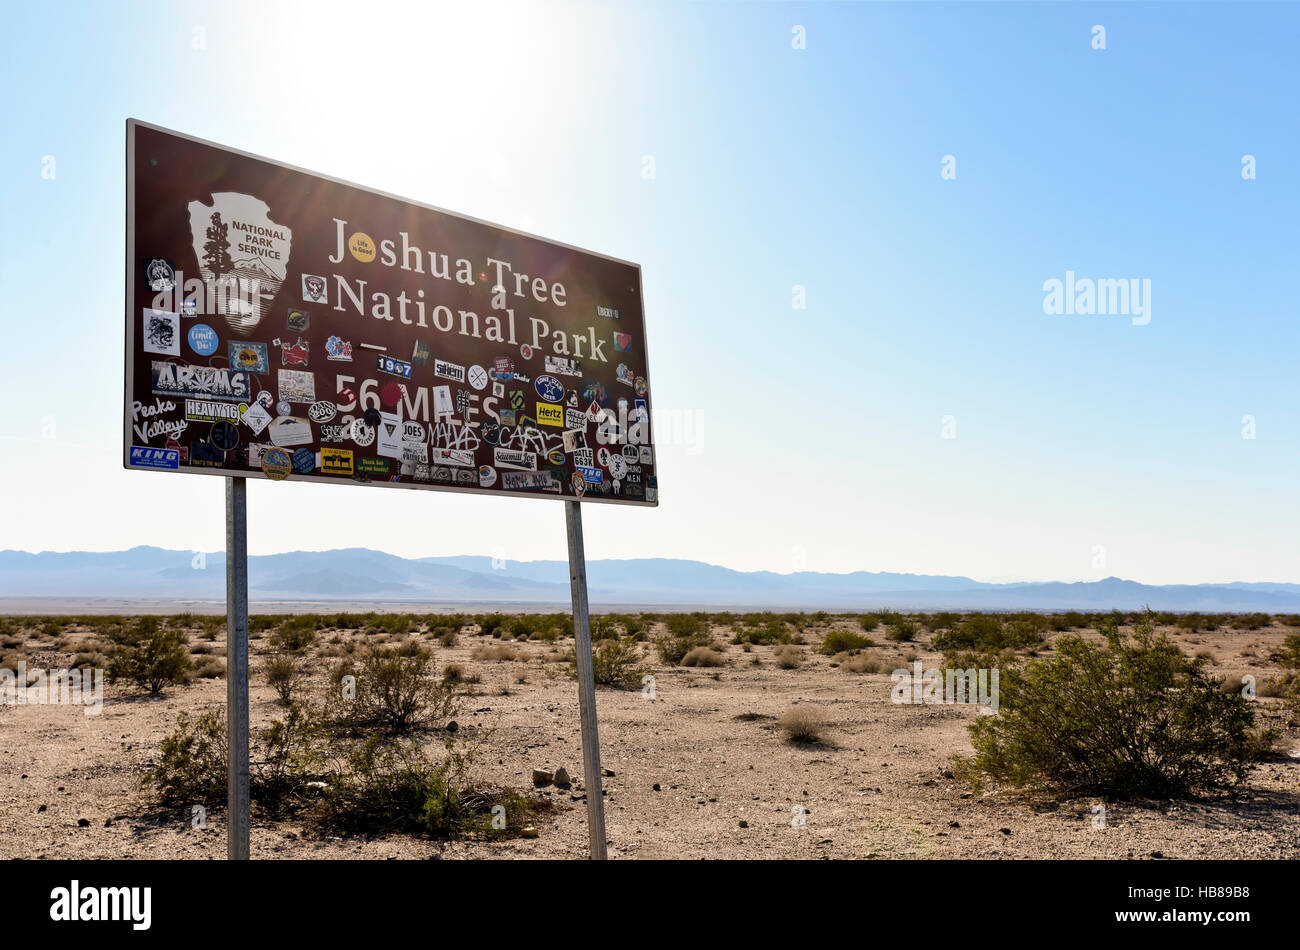 A National Park Service sign for Joshua Tree National Park, 56 miles ahead Stock Photo